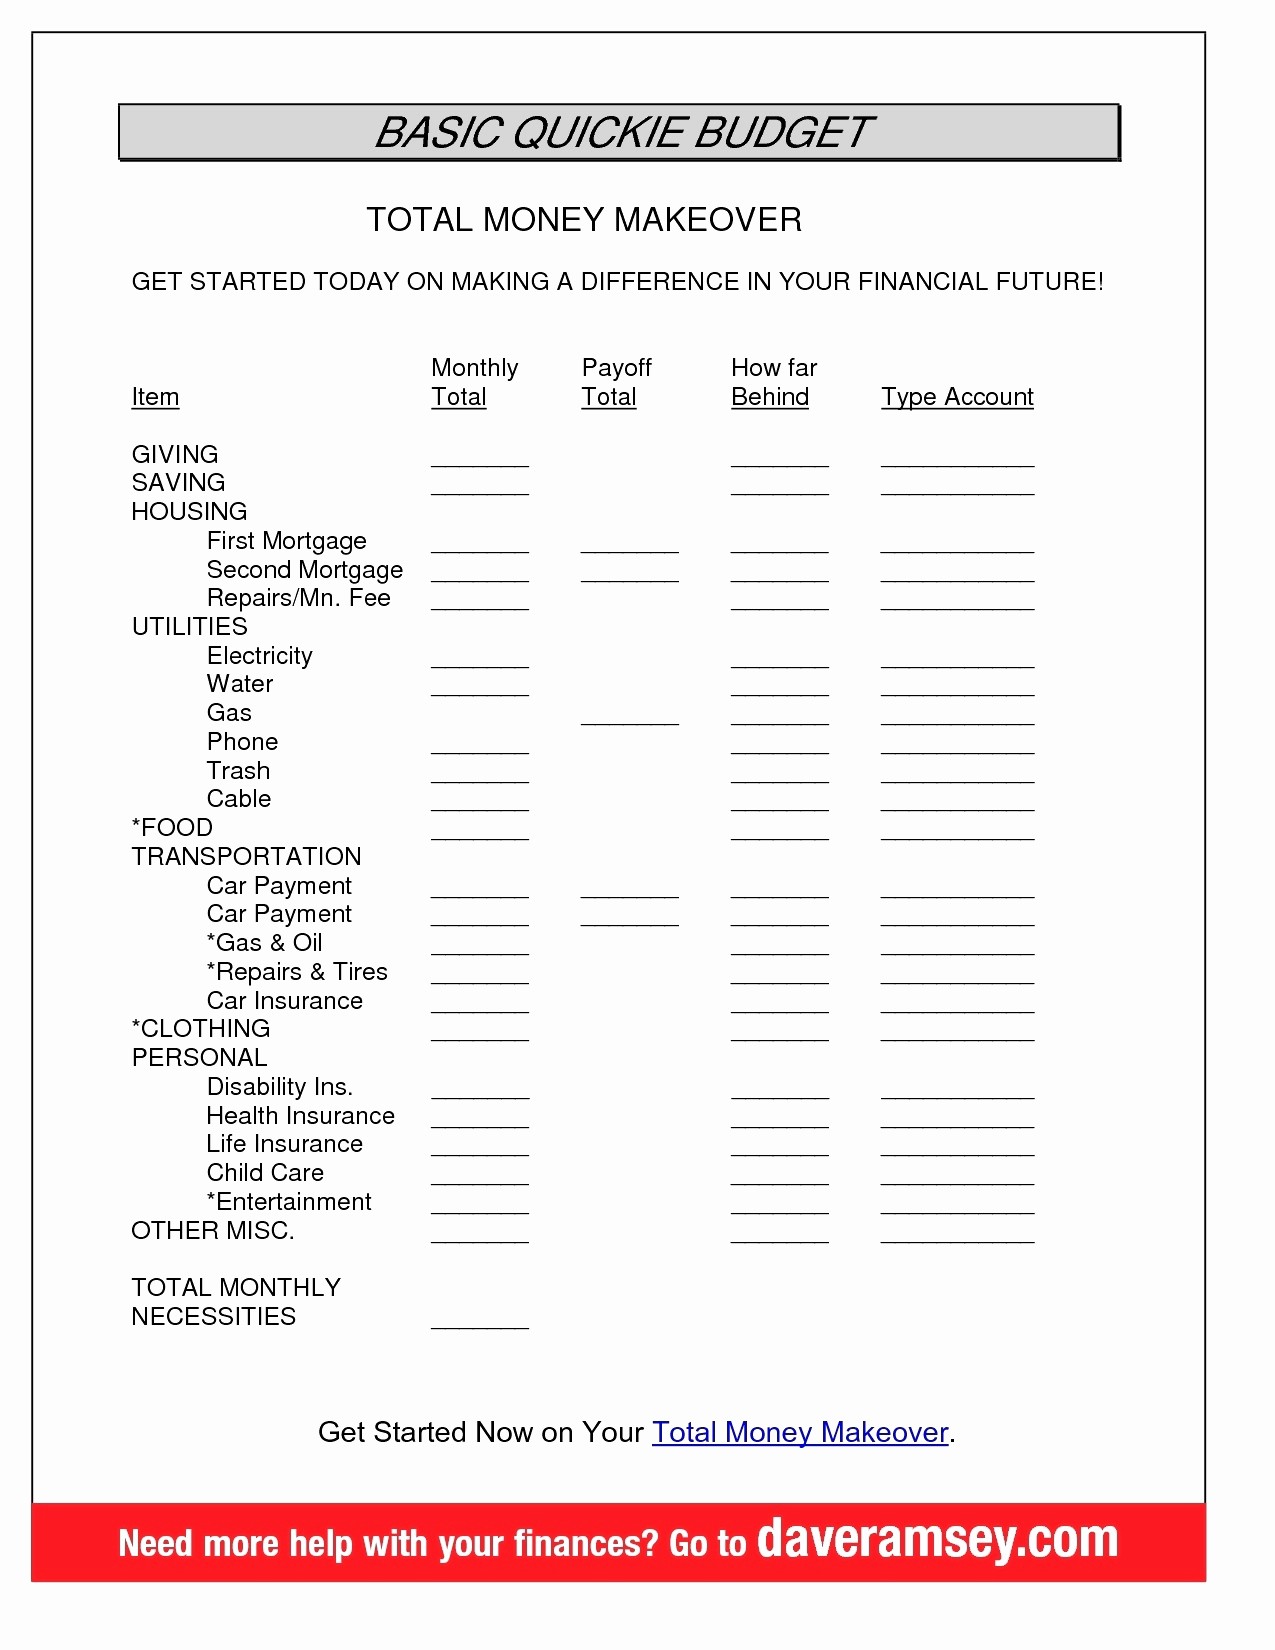 Dave Ramsey Debt Snowball Pdf Unique Total Money Makeover Free Document